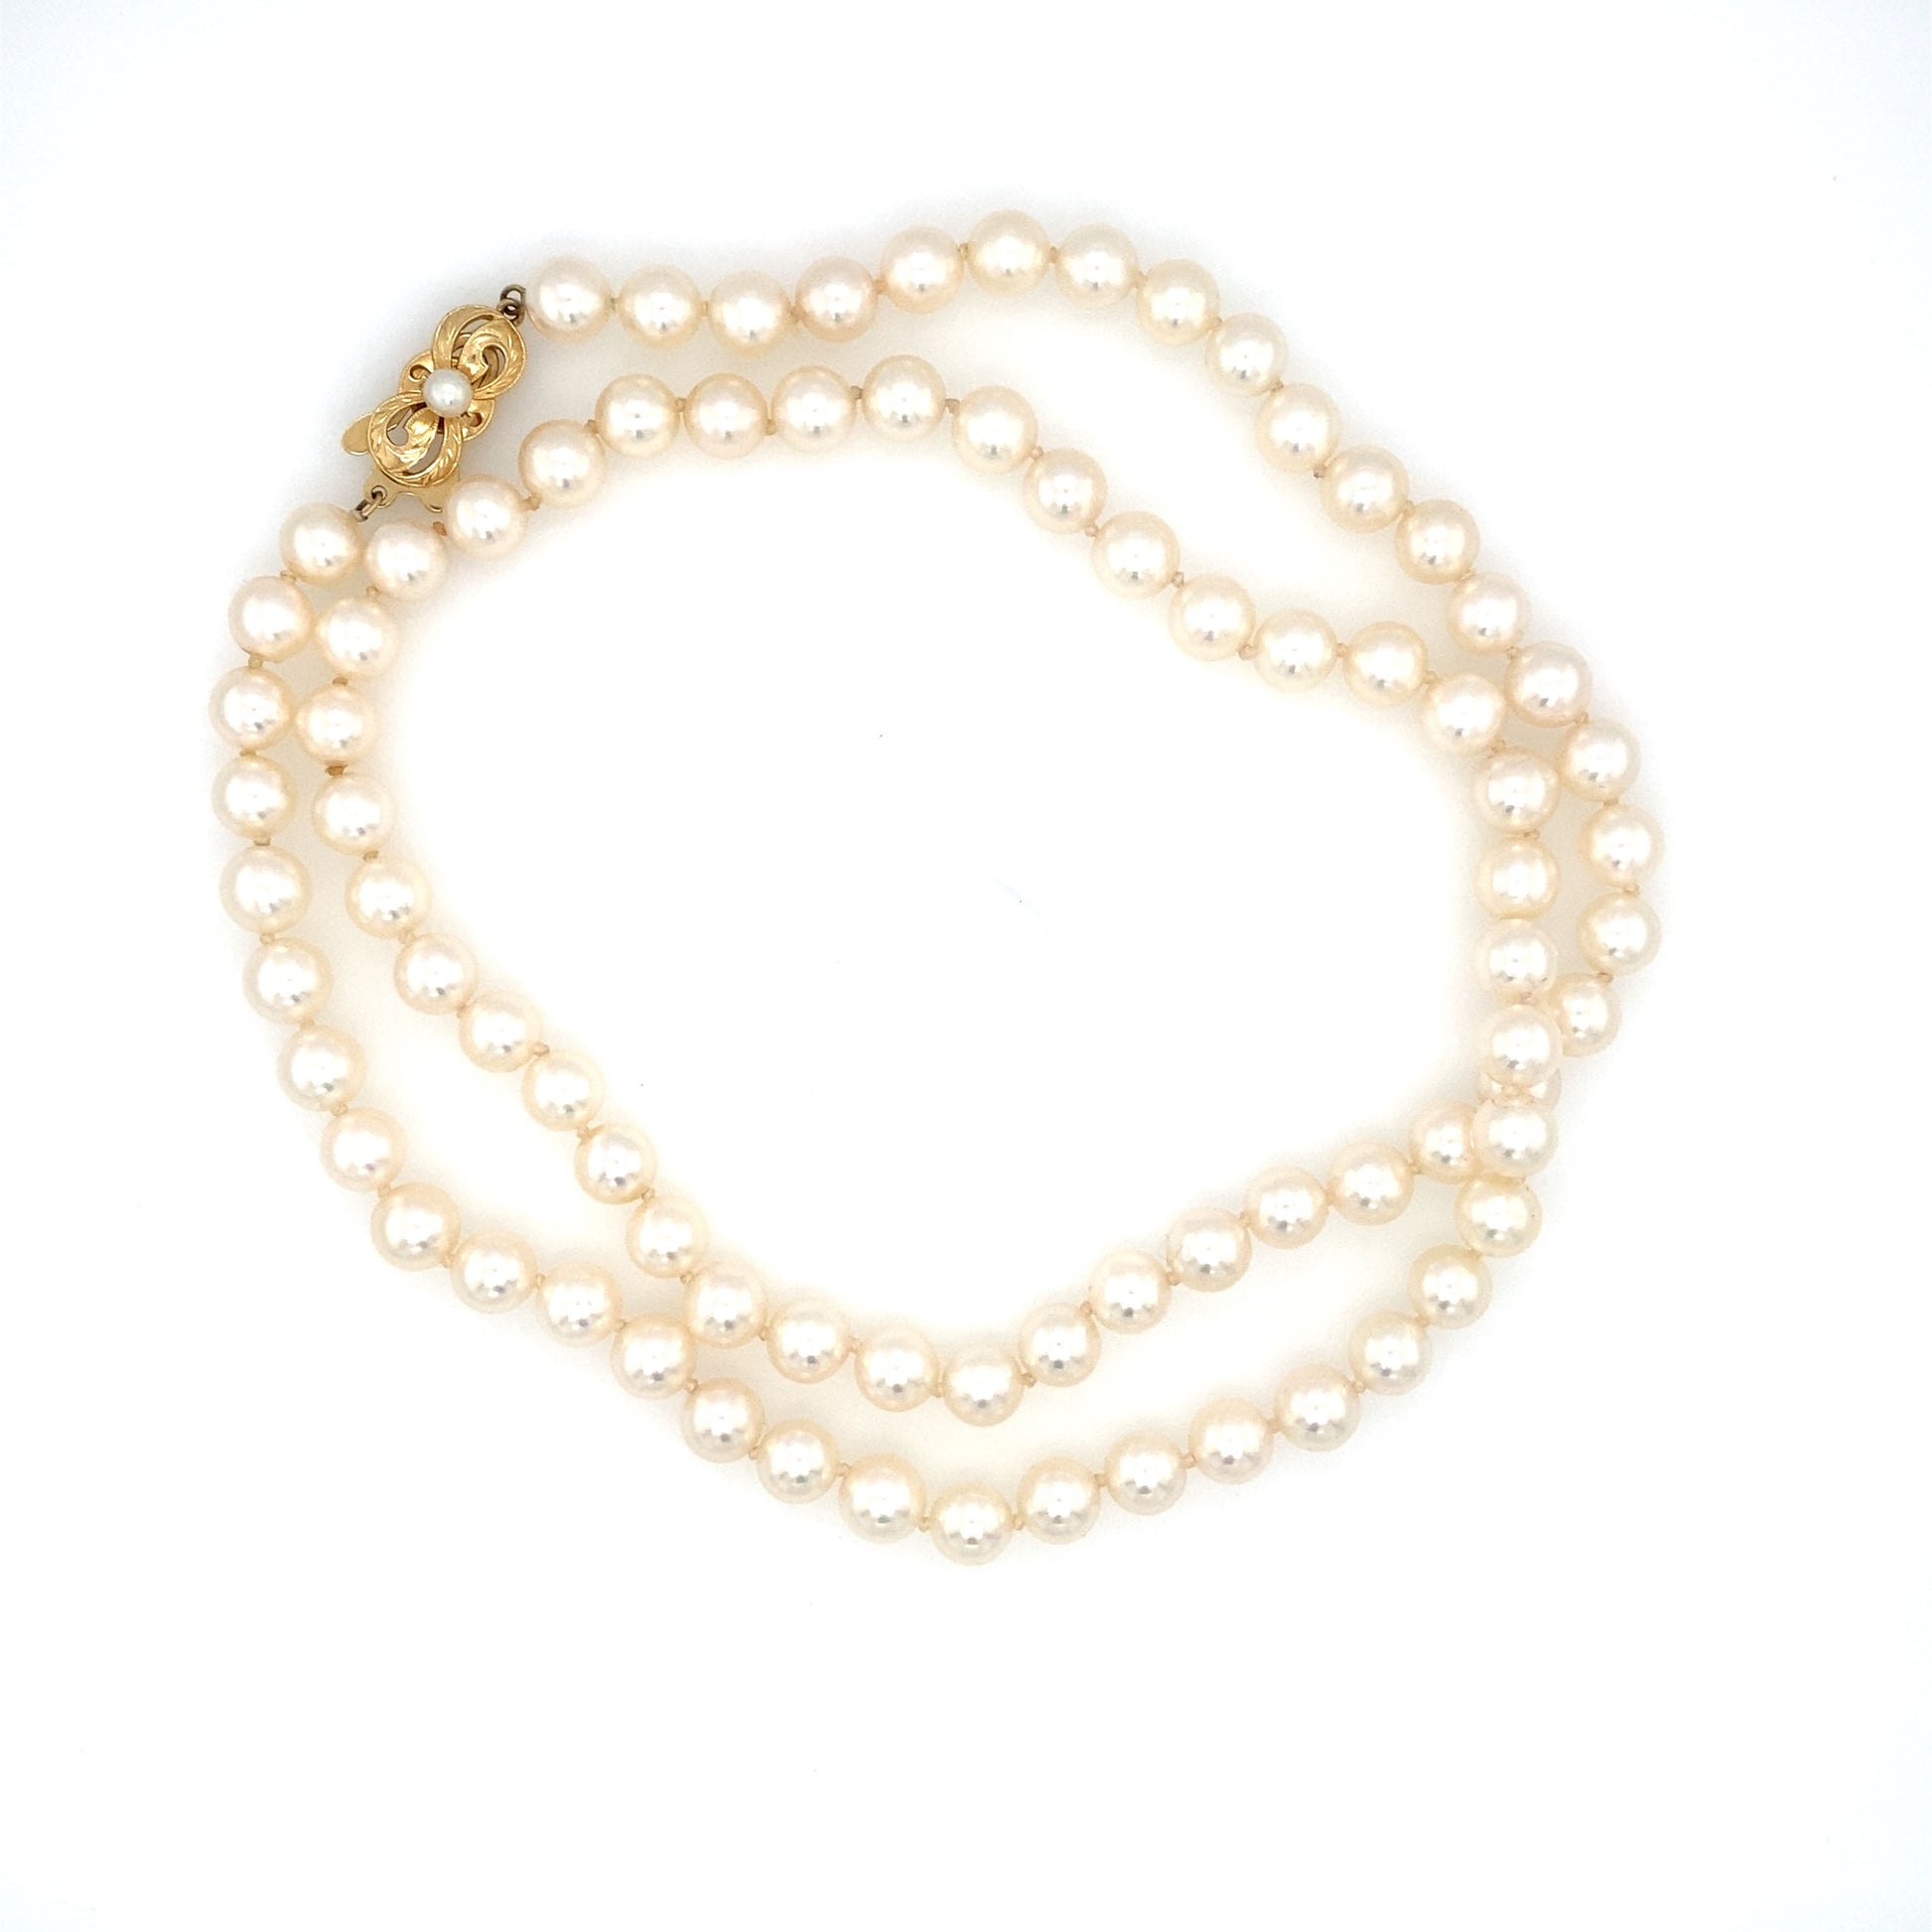 Mikimoto 6.5mm Pearl Necklace with 18K Gold Clasp – The Verma Group